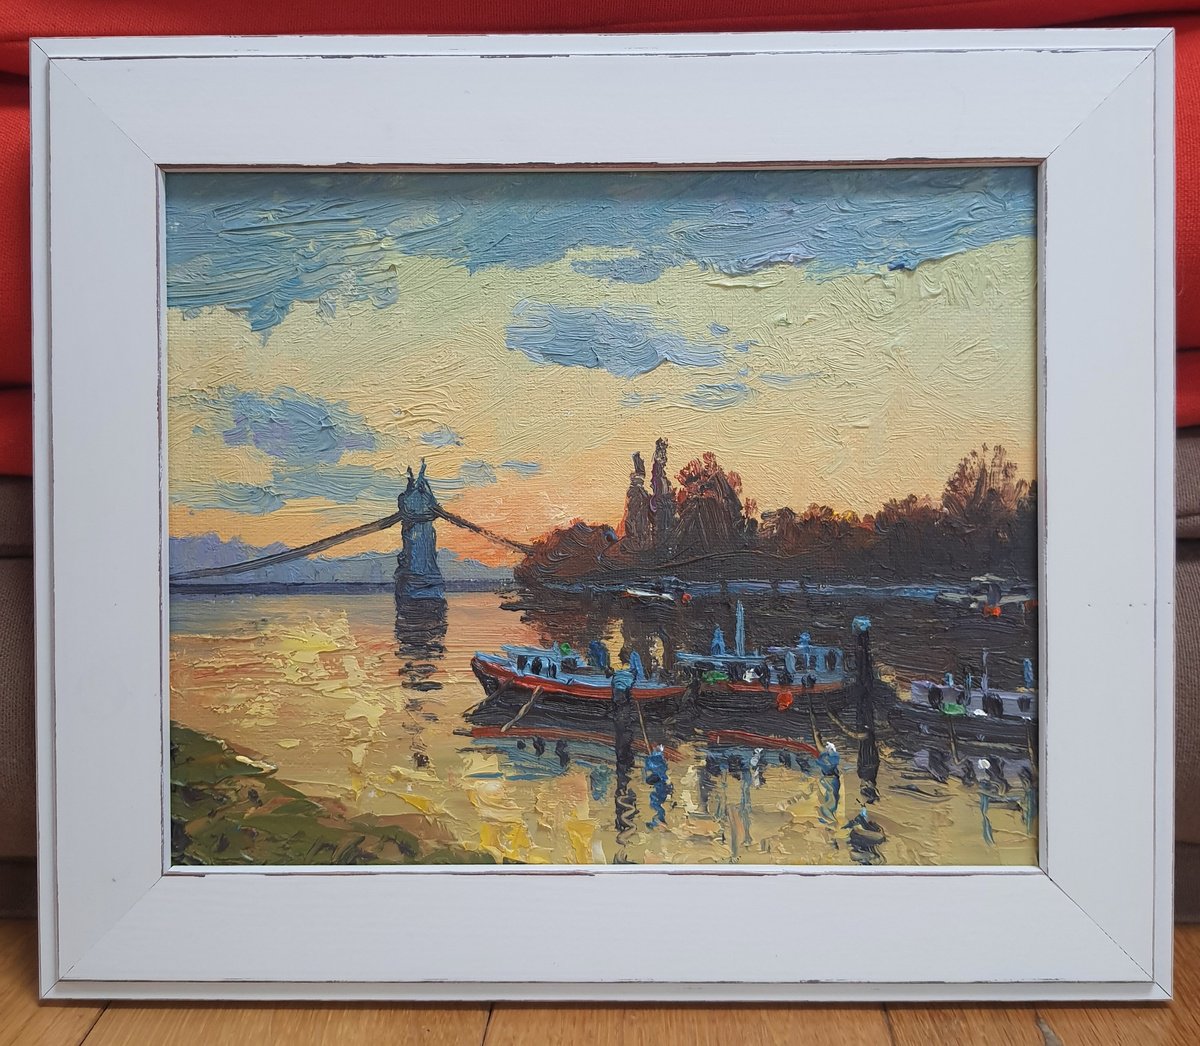 Hammersmith bridge and The Thames, London by Roberto Ponte